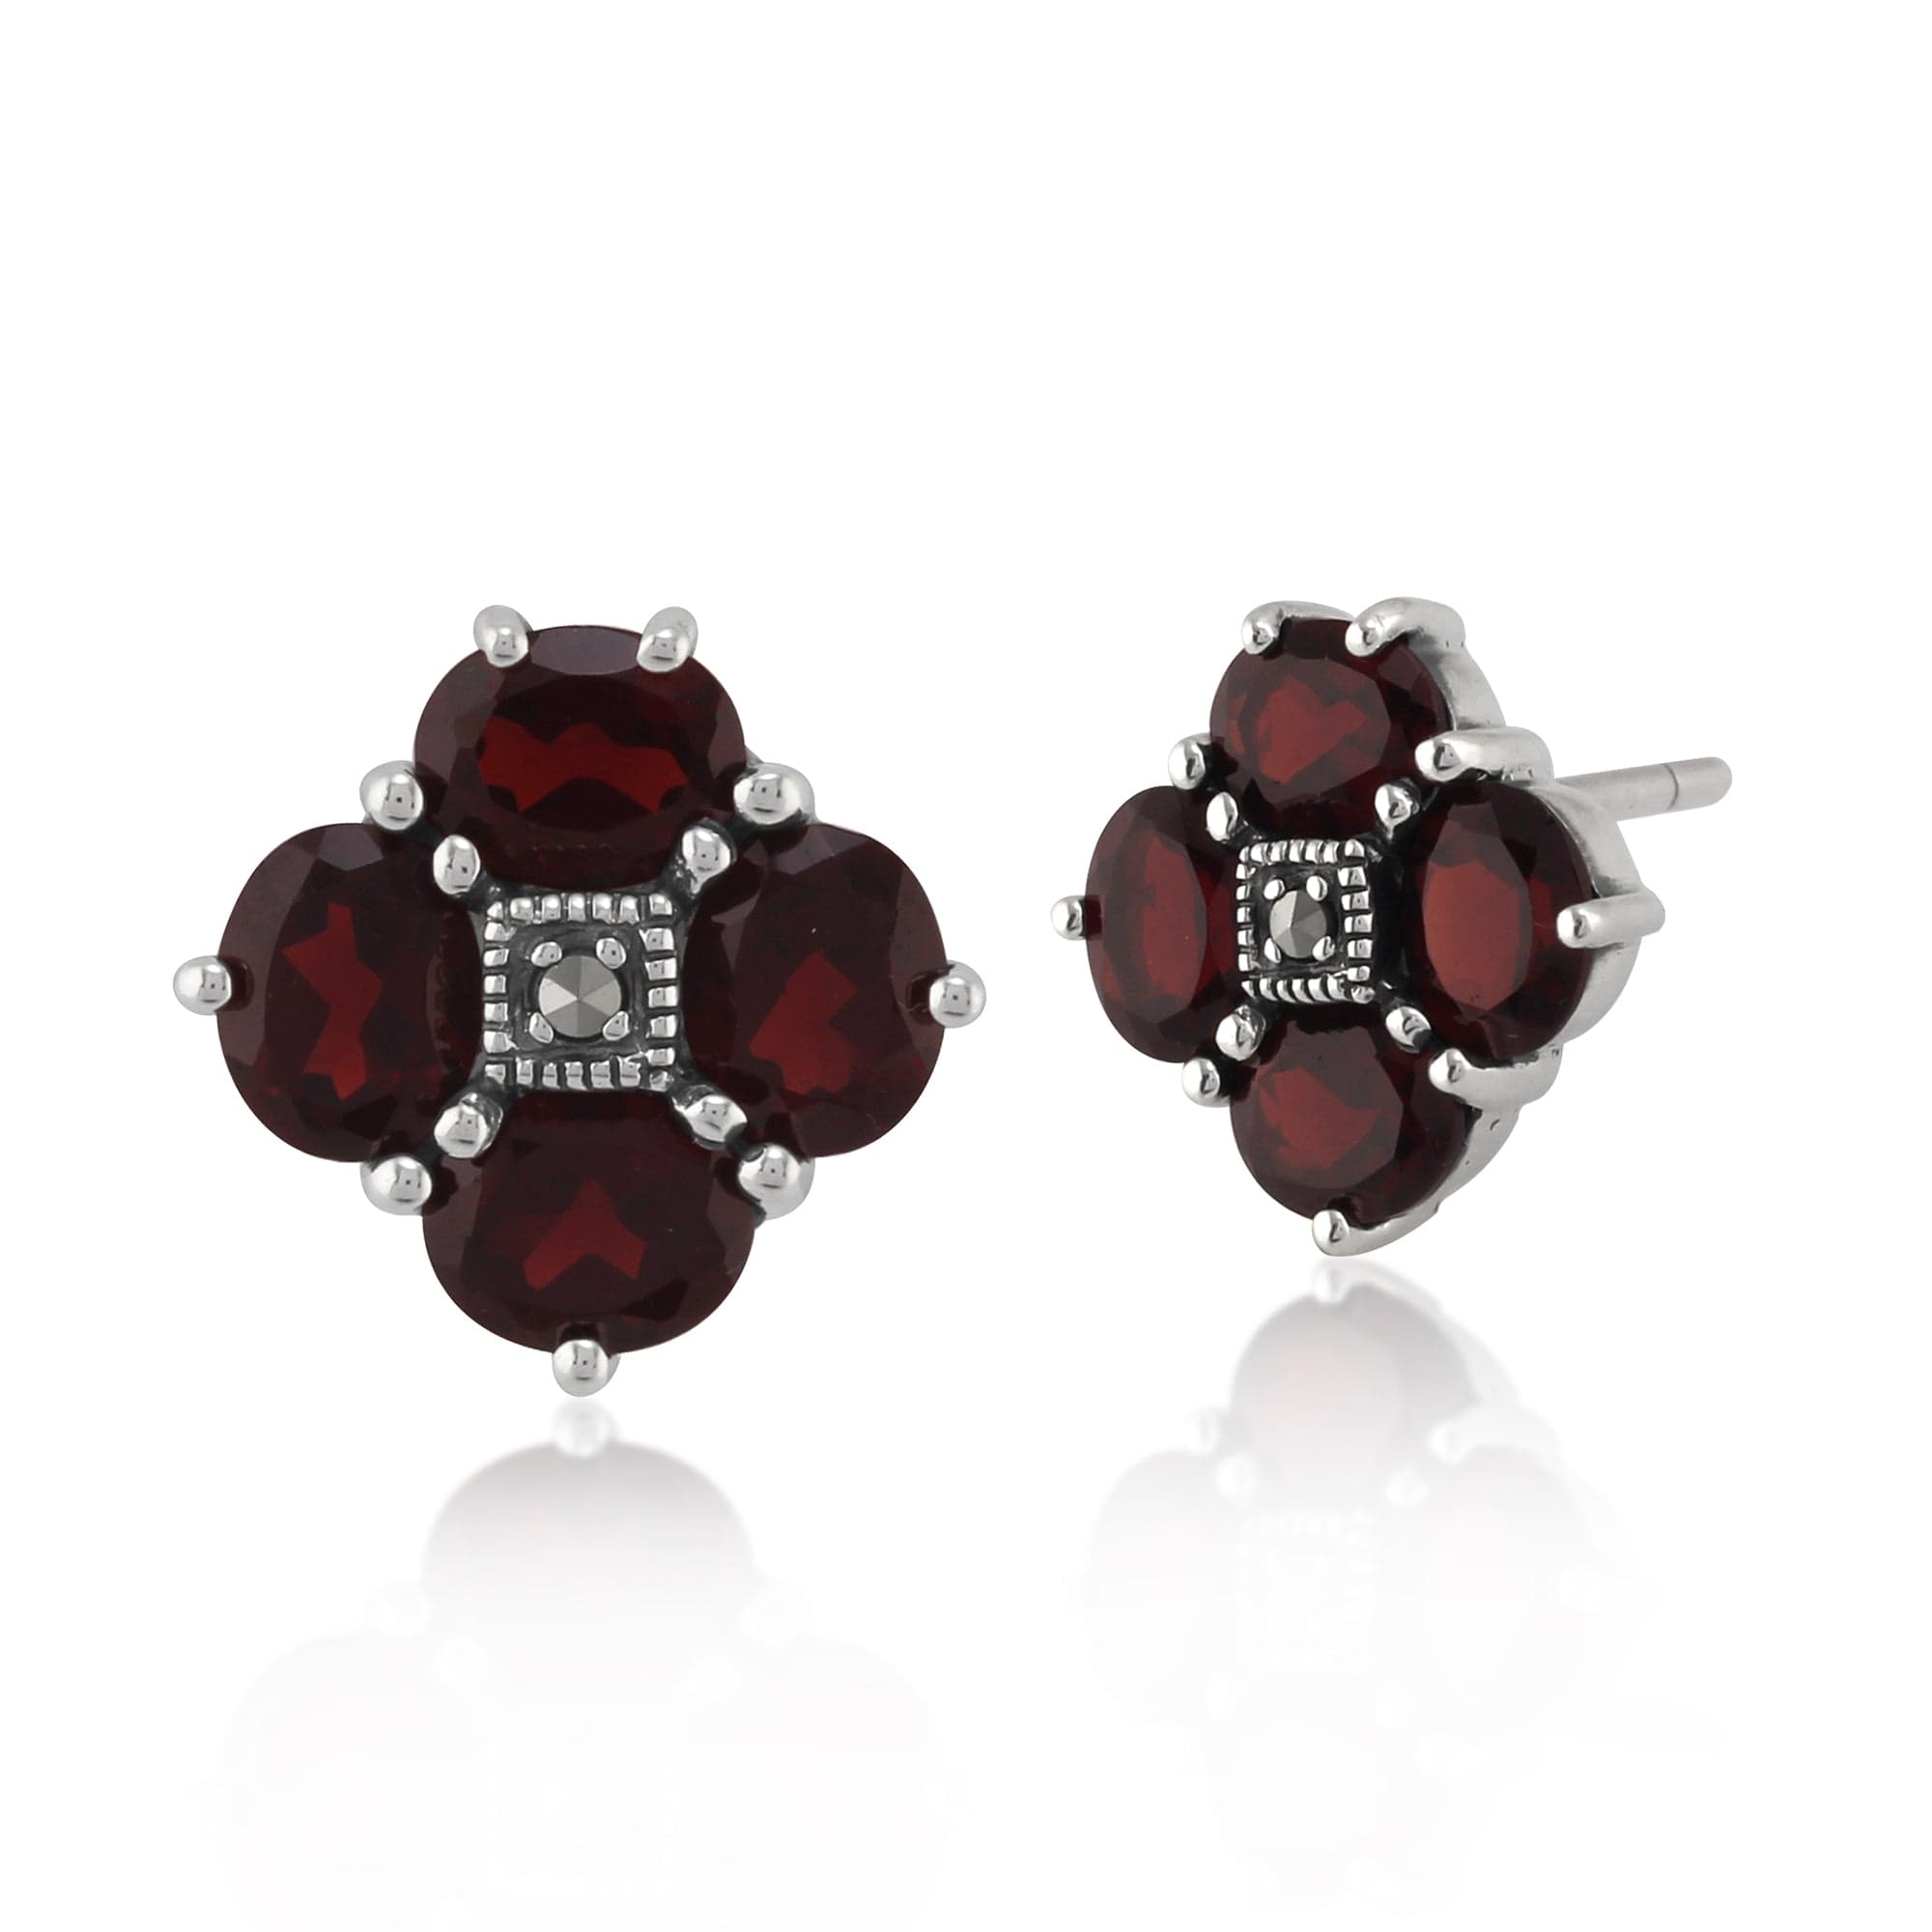 Photos - Earrings Art Nouveau Style Round Garnet & Marcasite Cluster Stud  in 925 St